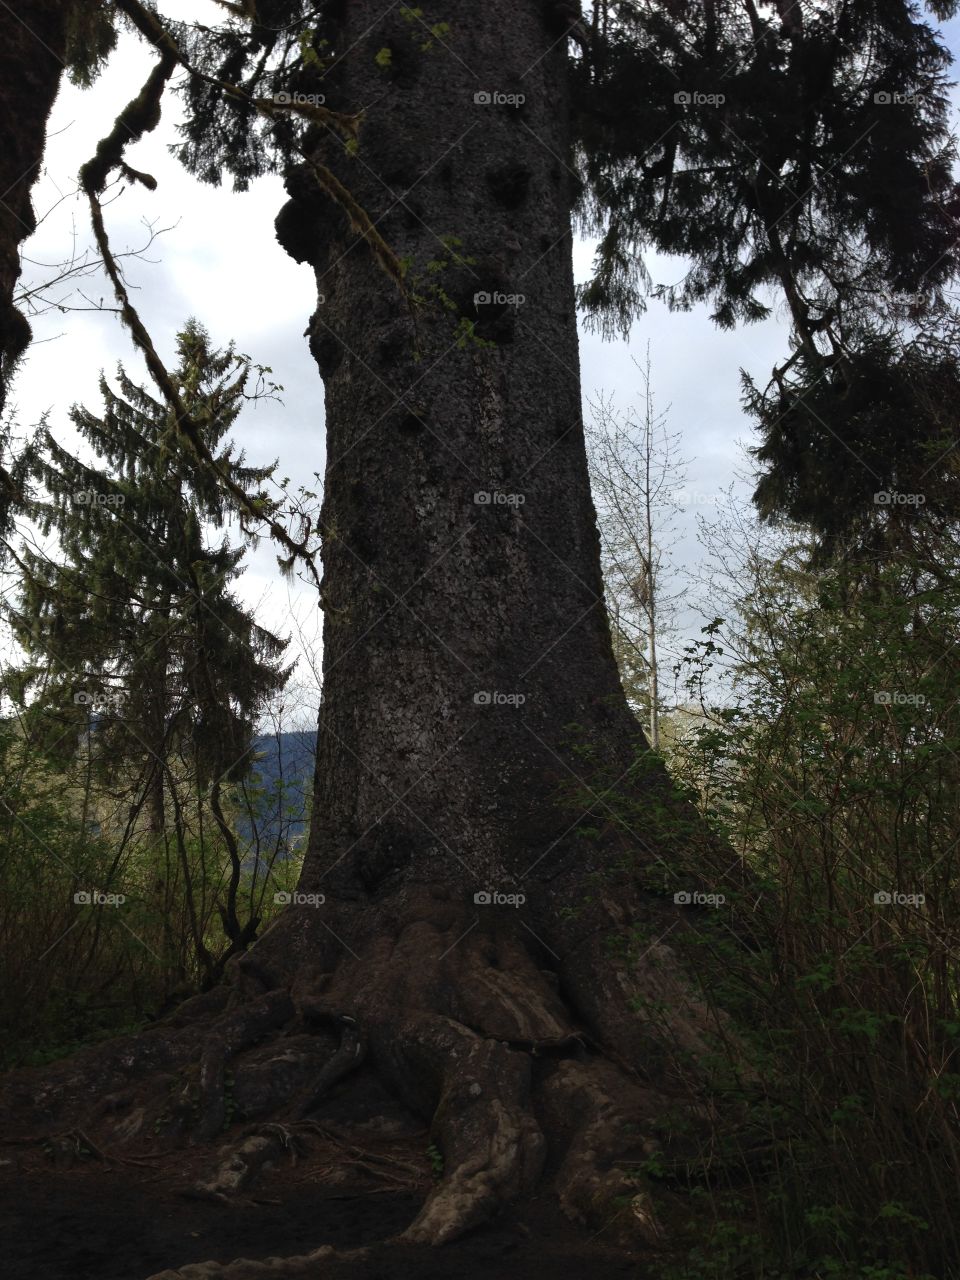 Sitka Spruce. Spruce Tree in Quinault Reservation